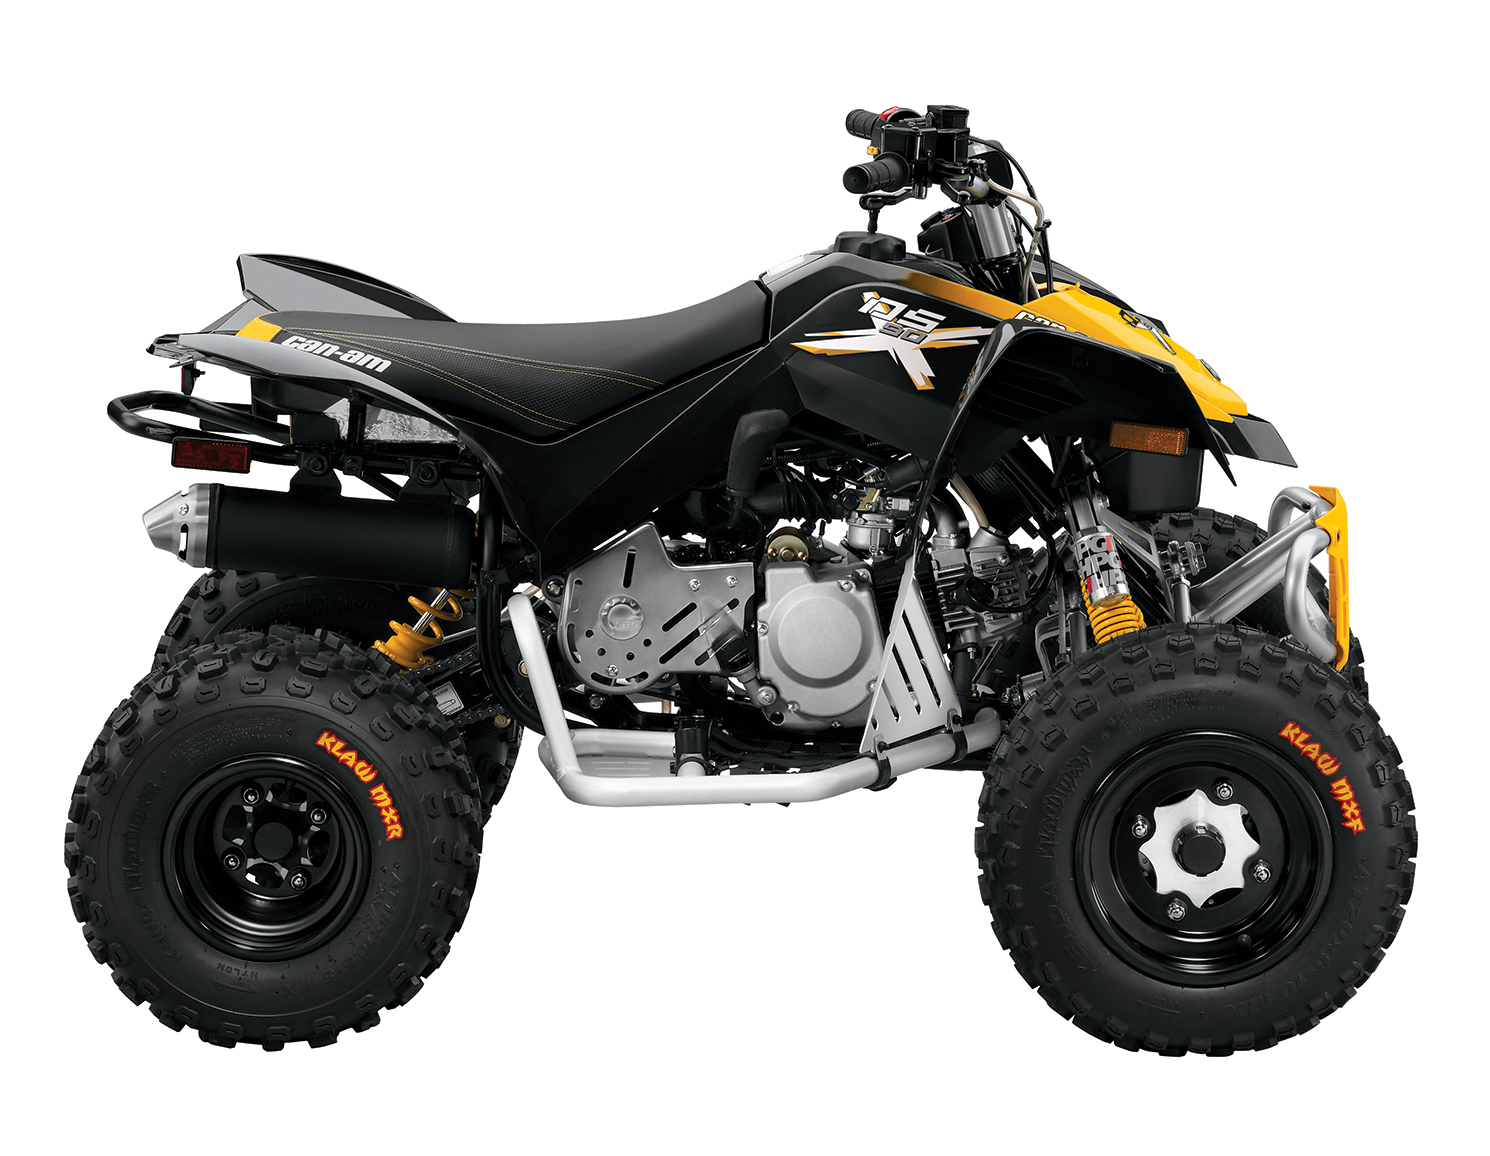  CAN-AM DS 90 X 4-TEC v 2014  2 